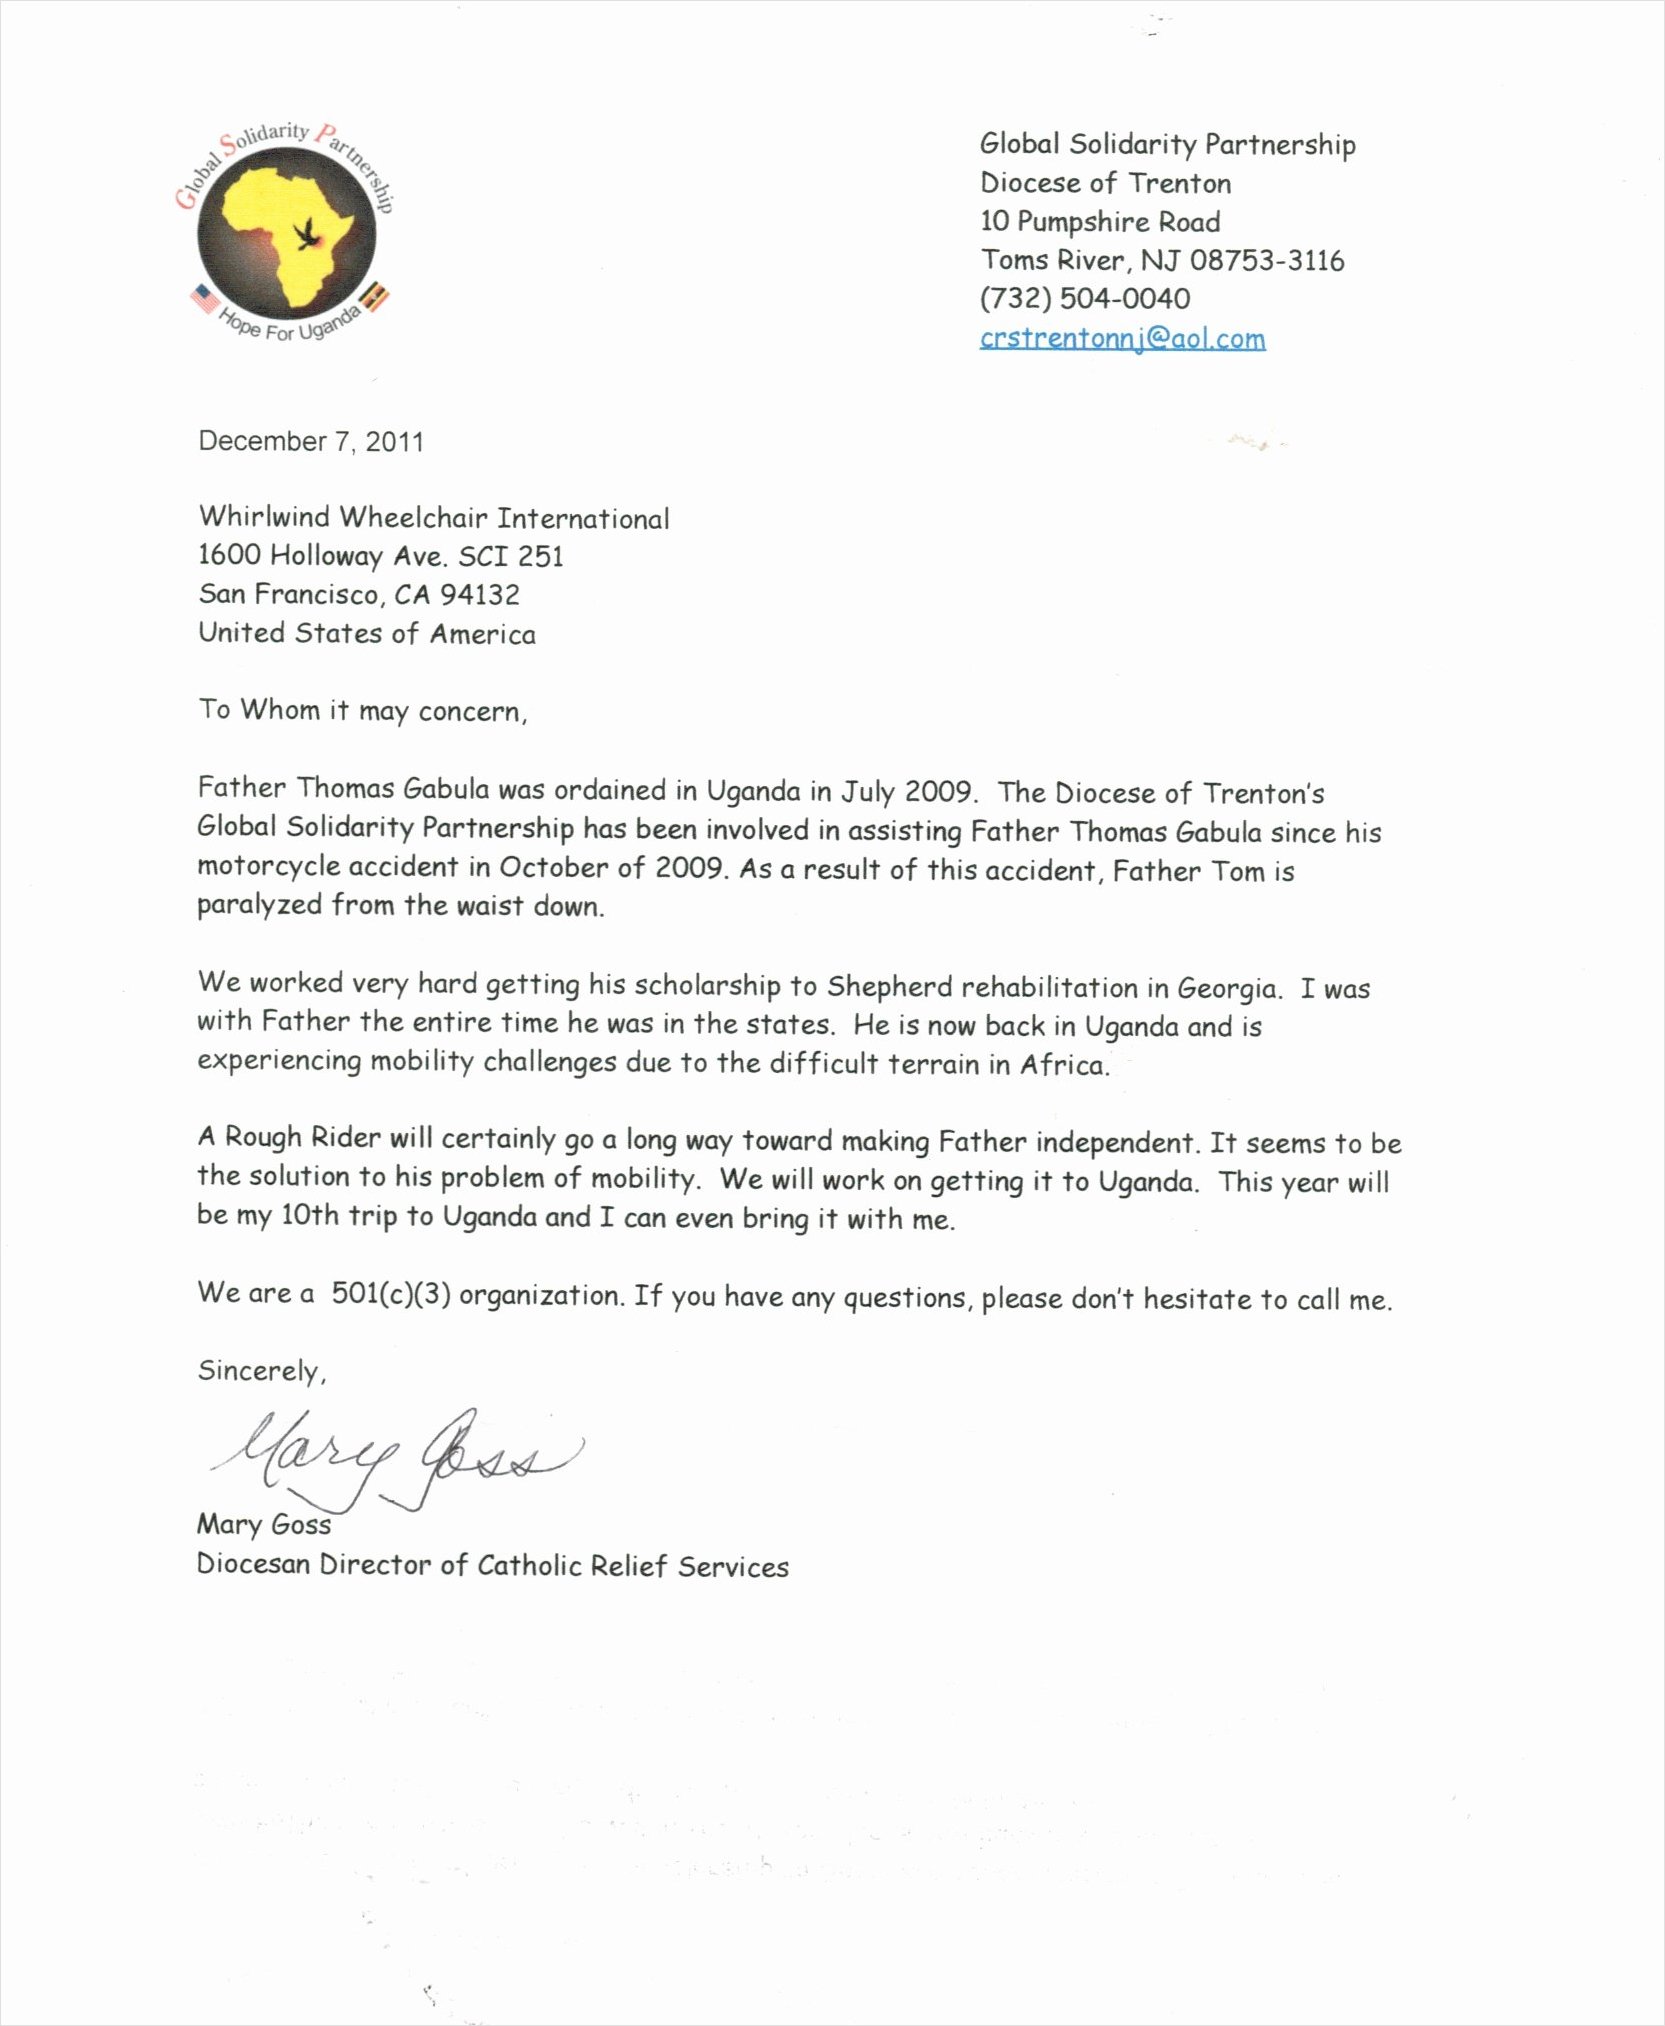 sample of support letter template for missions trip